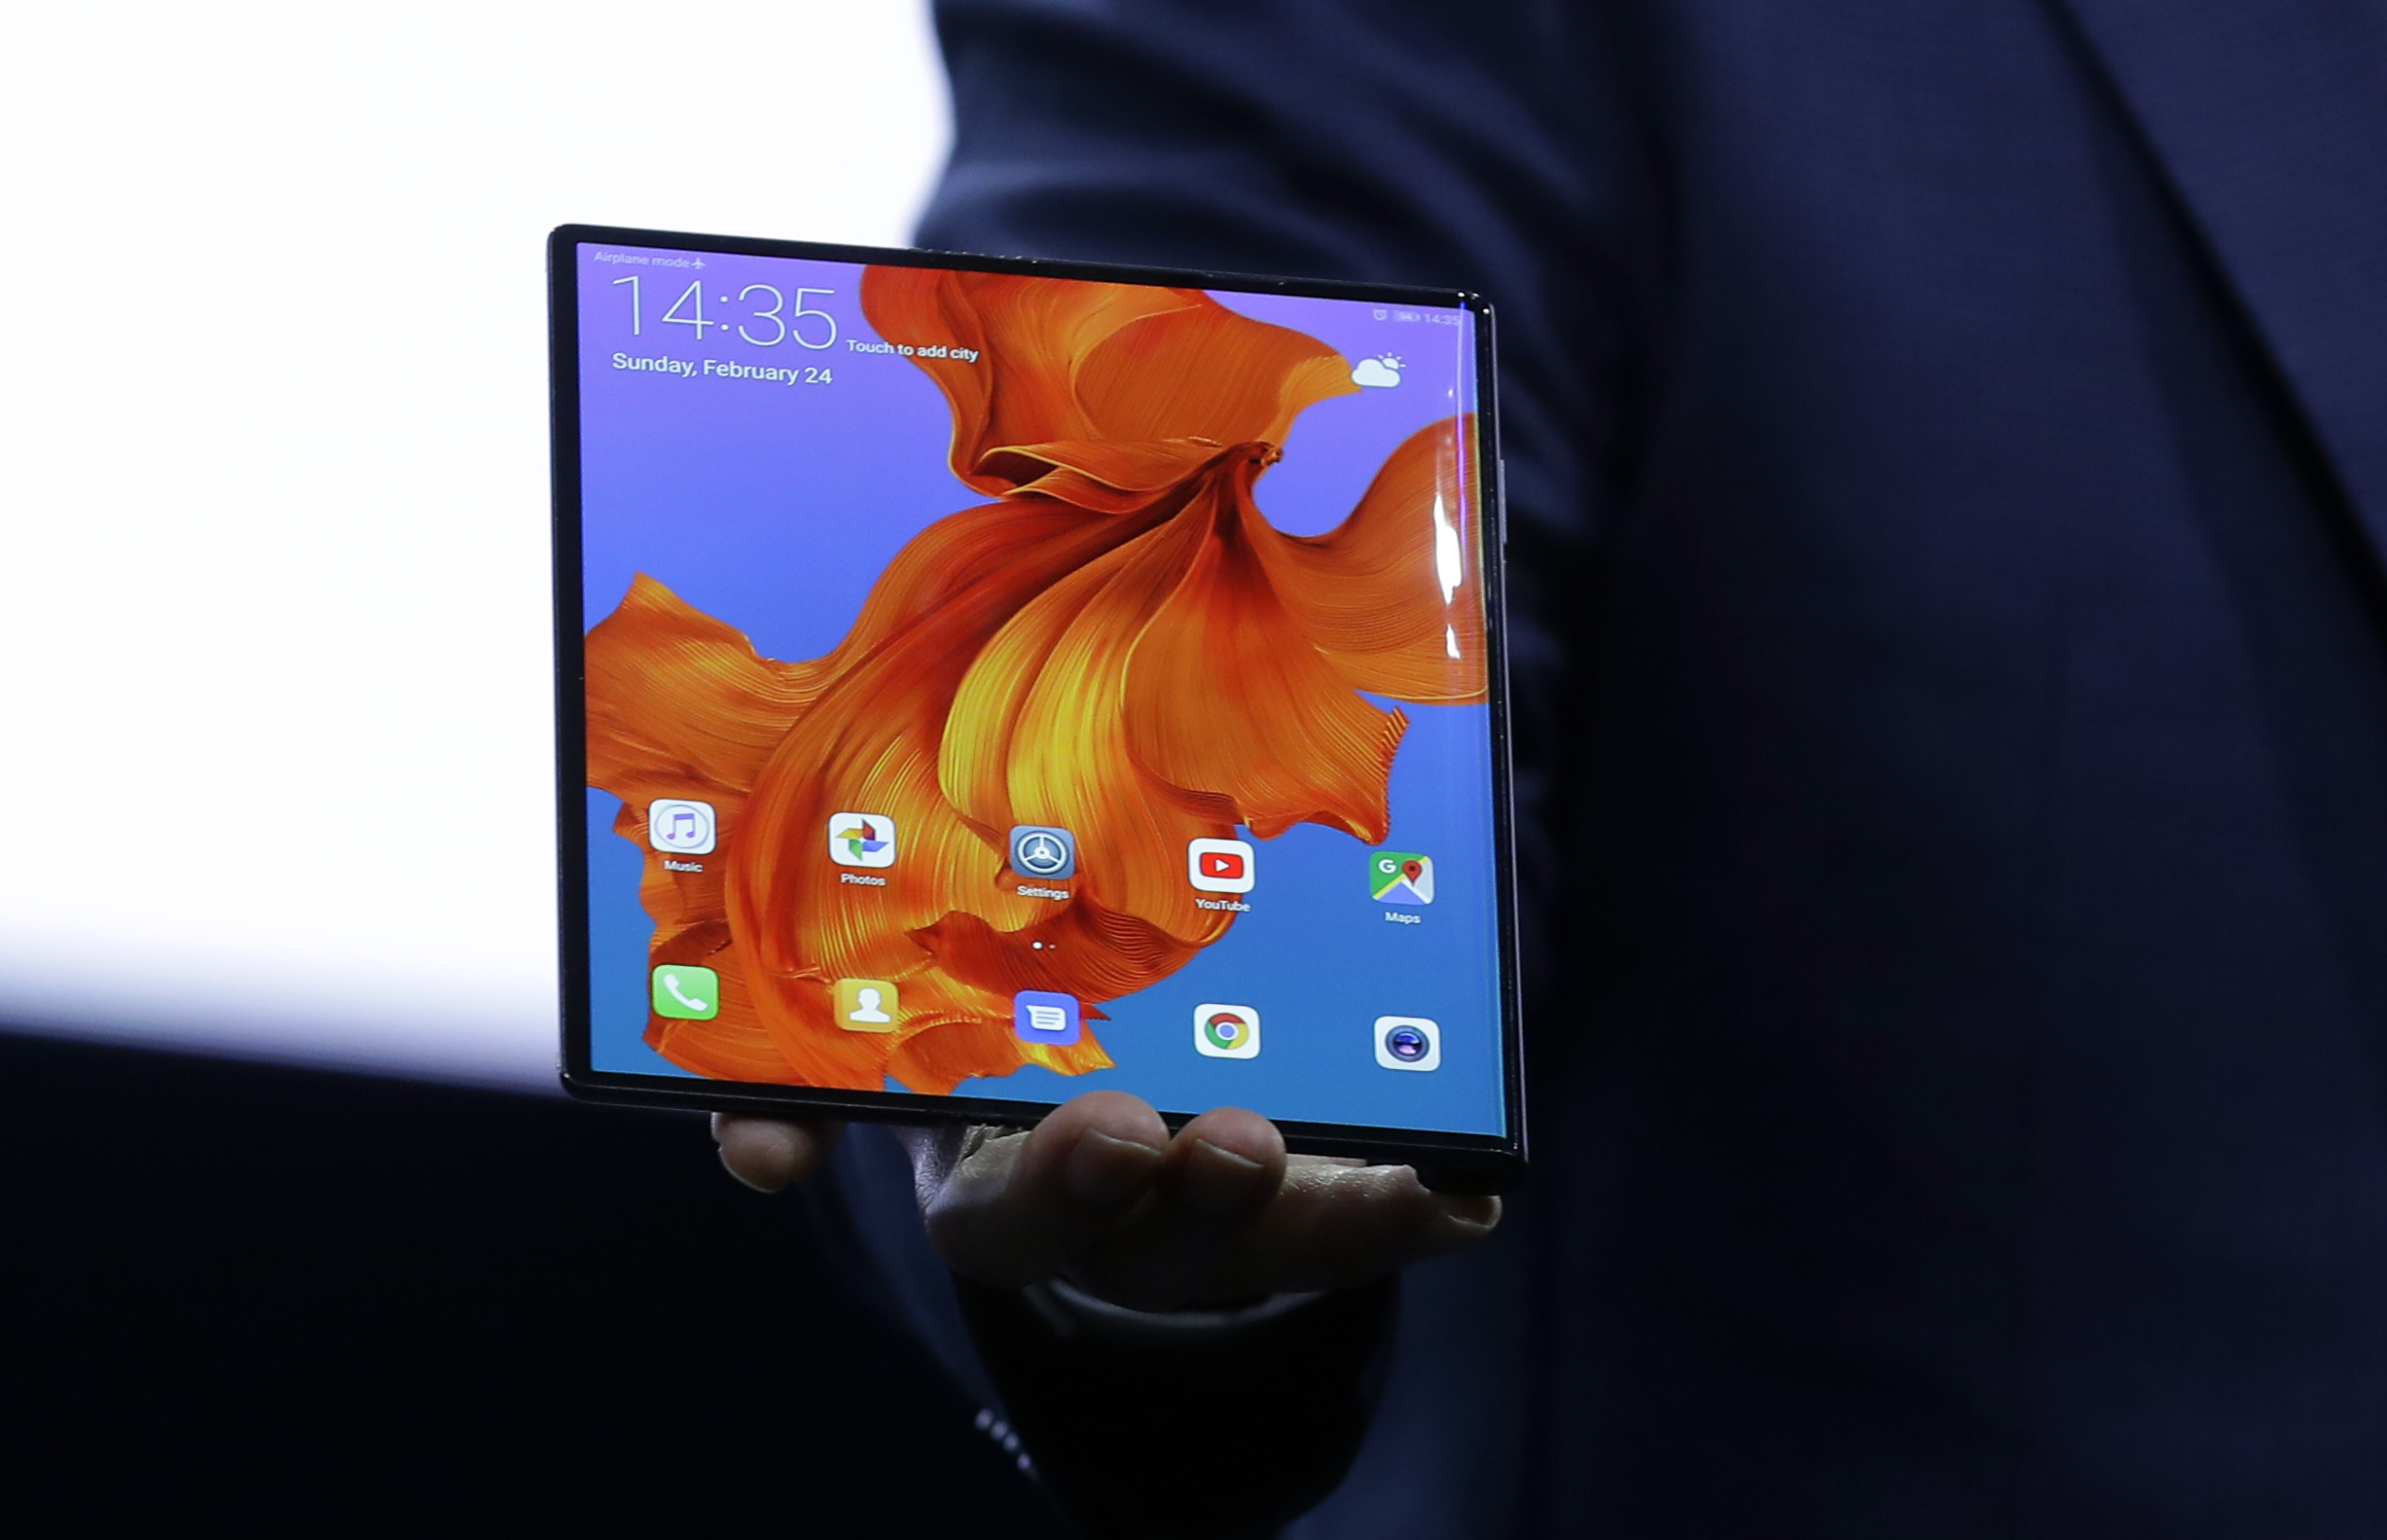 jammer nut key missing - China’s Huawei Unveils 5G Phone with Folding Screen